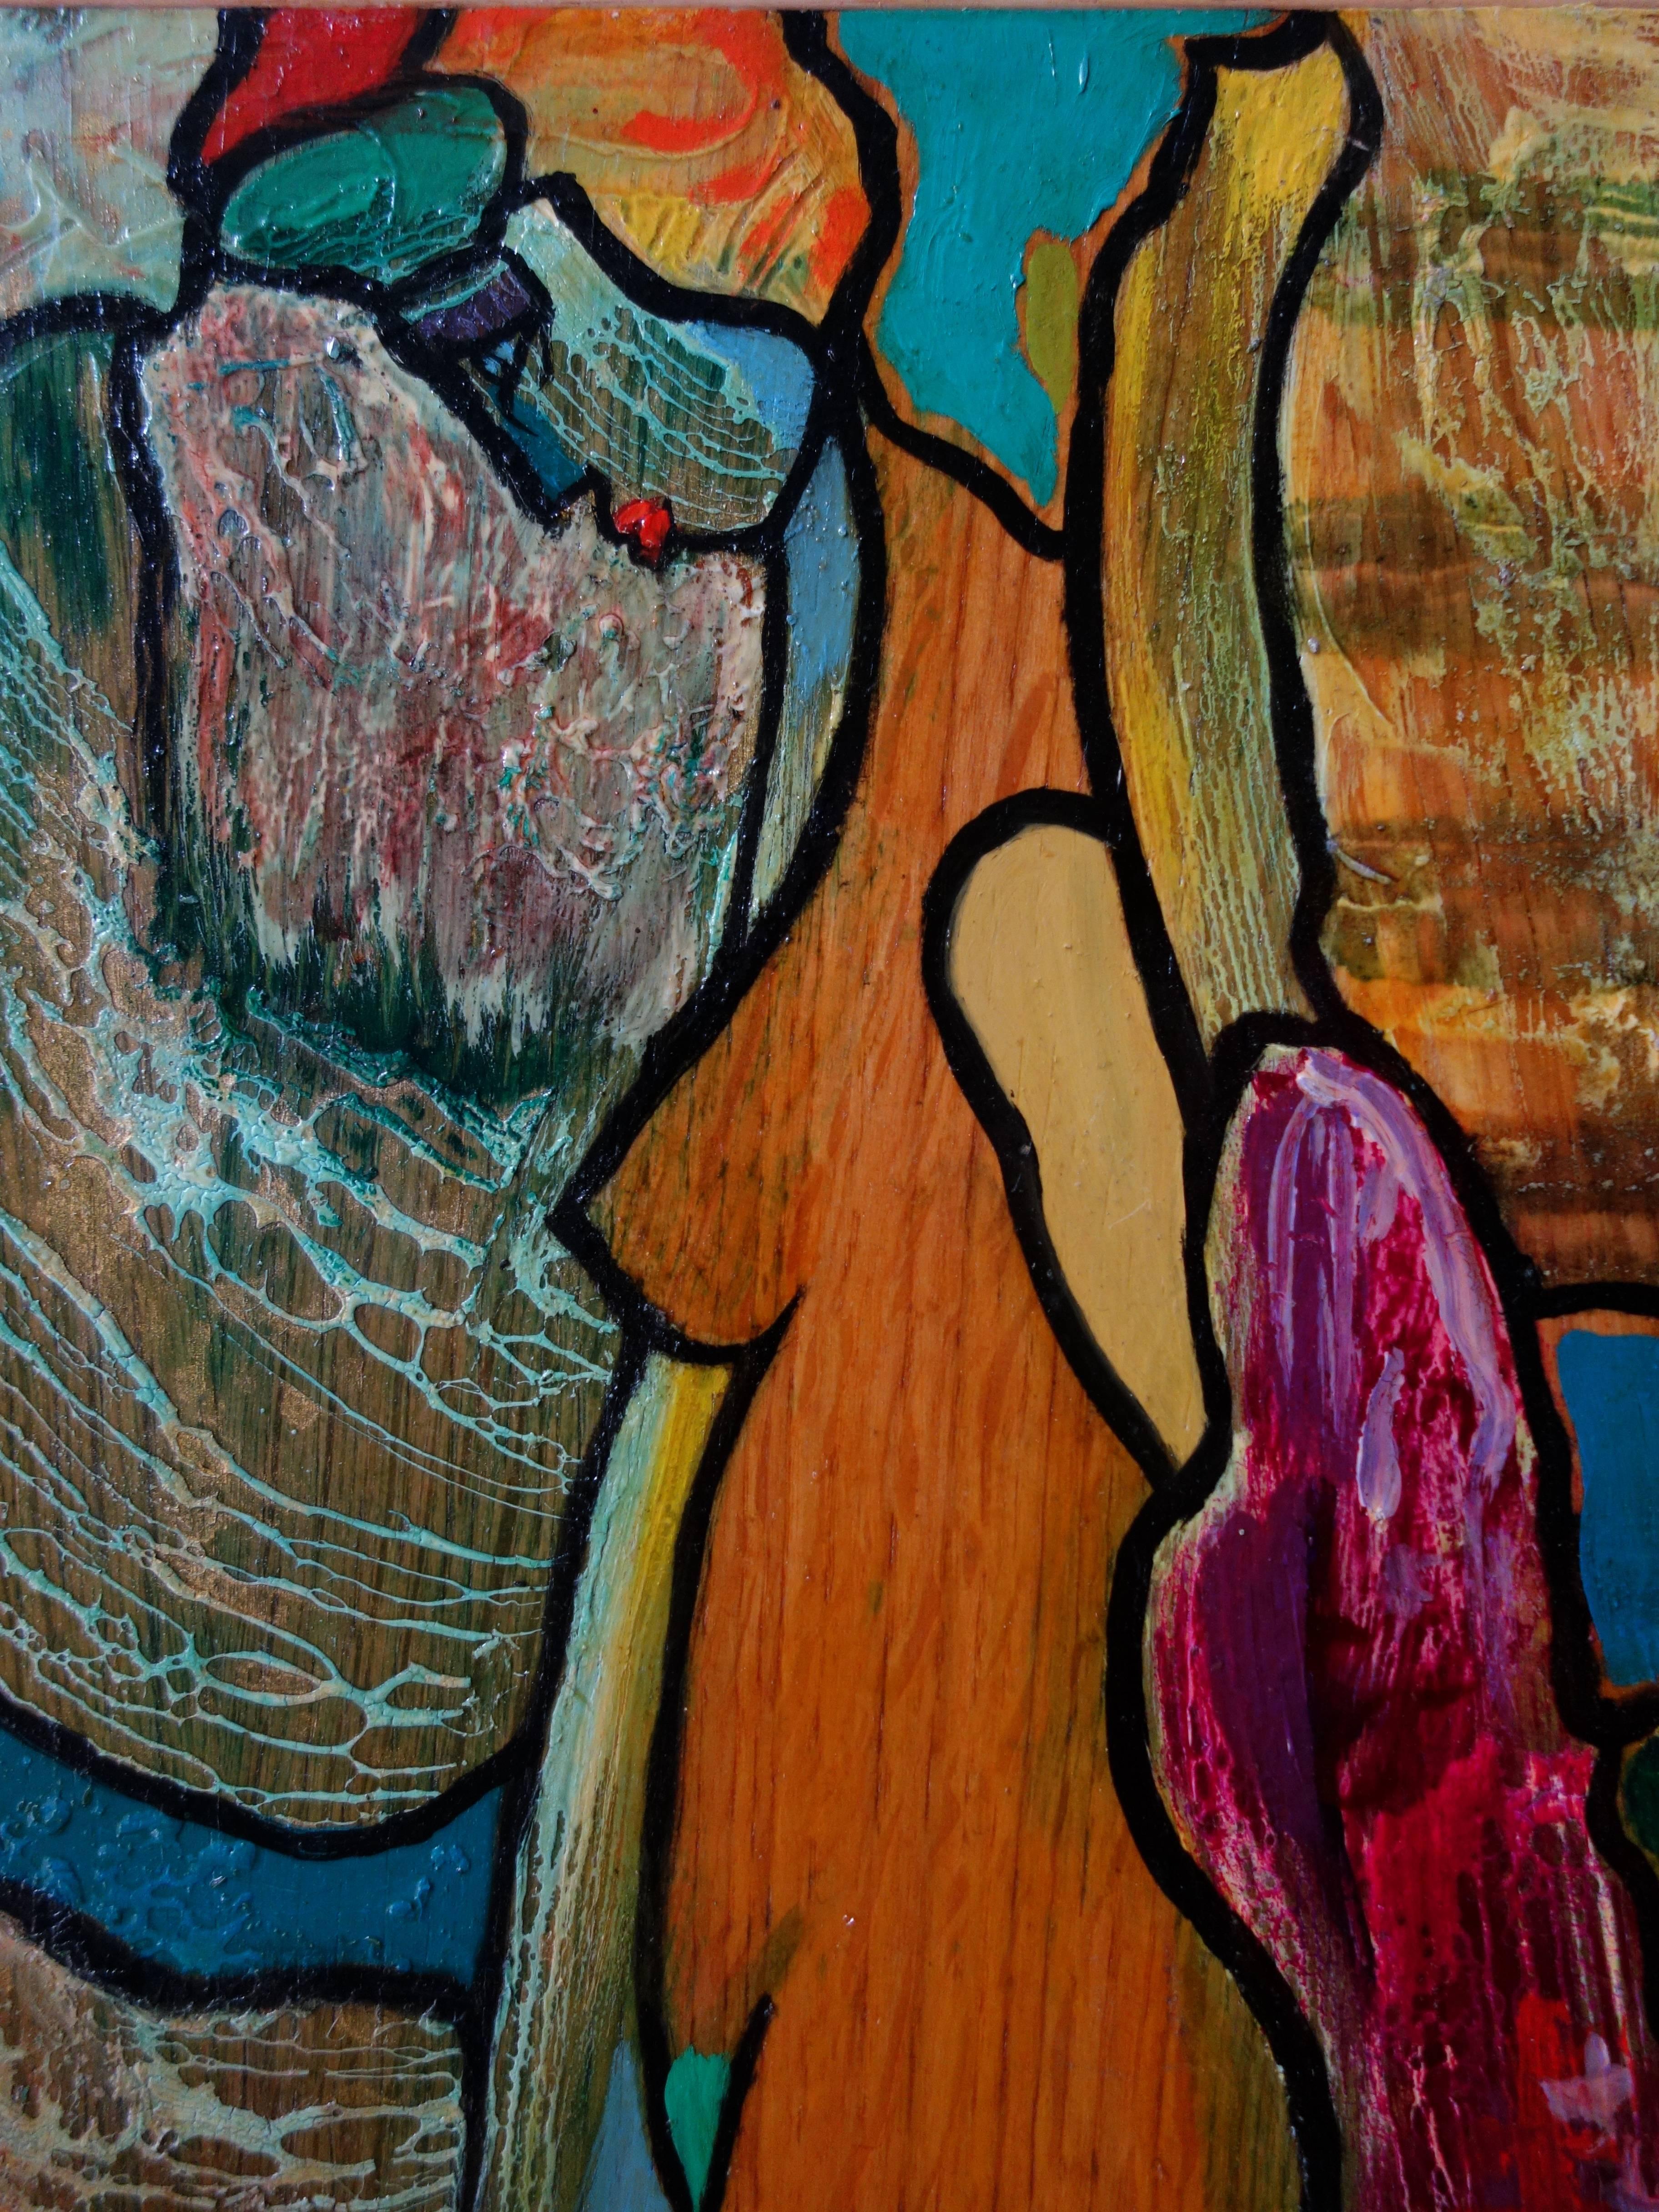 Nude Woman Profile - Original painting on panel - Handsigned - Painting by Hassan Ertugrul Kahraman